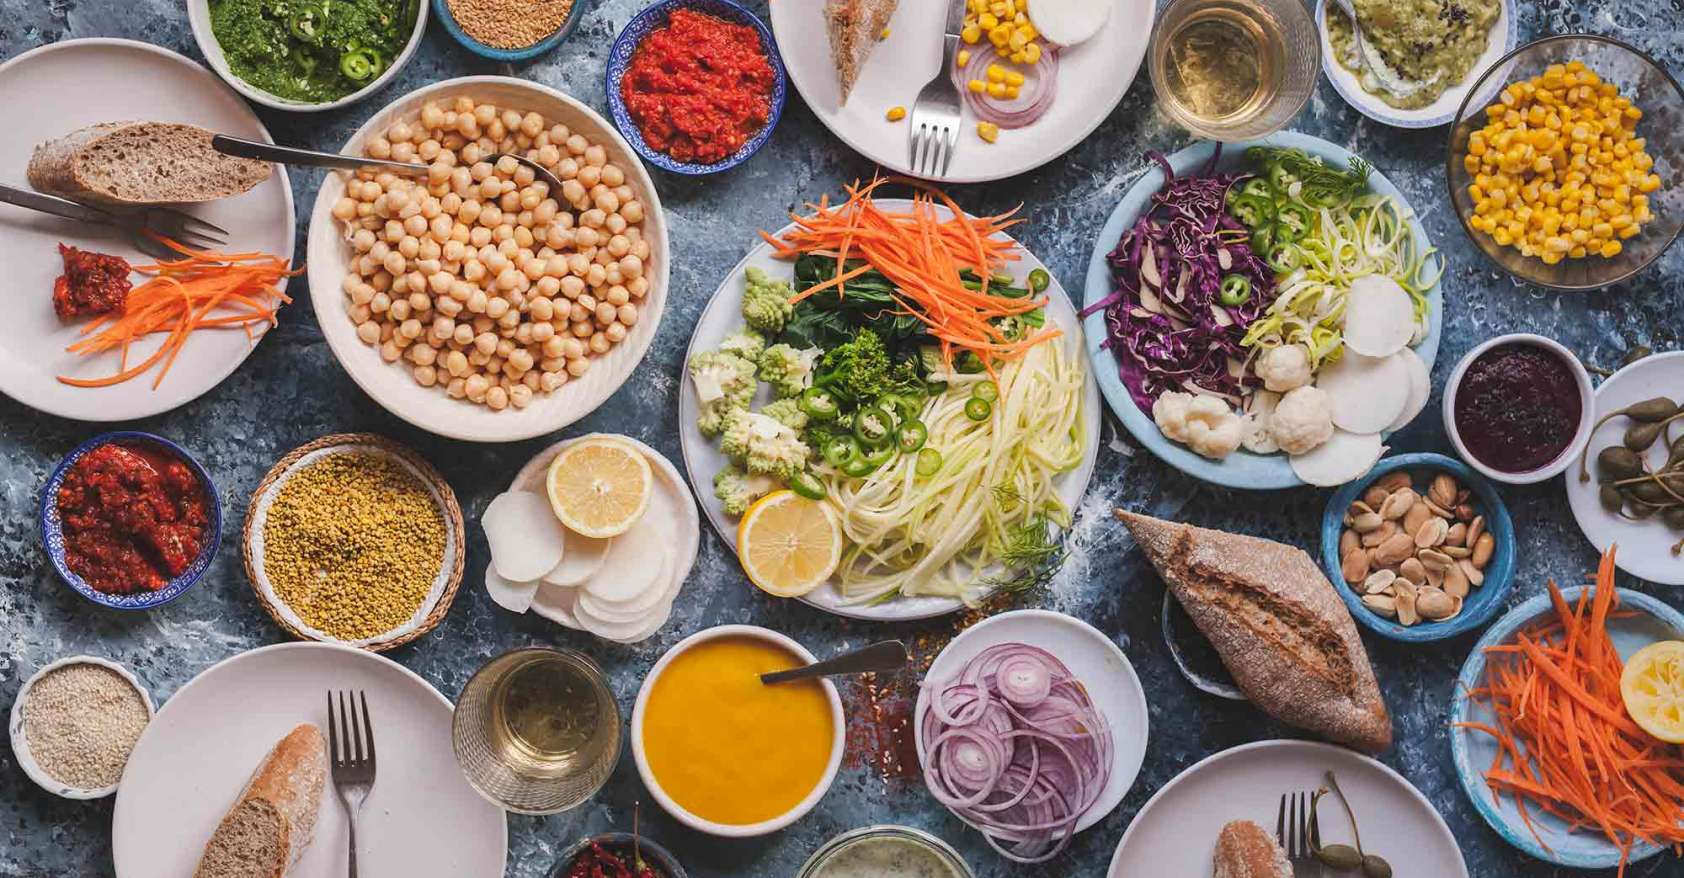 whole foods plant-based Vegan veggies meals on dining table shot from above